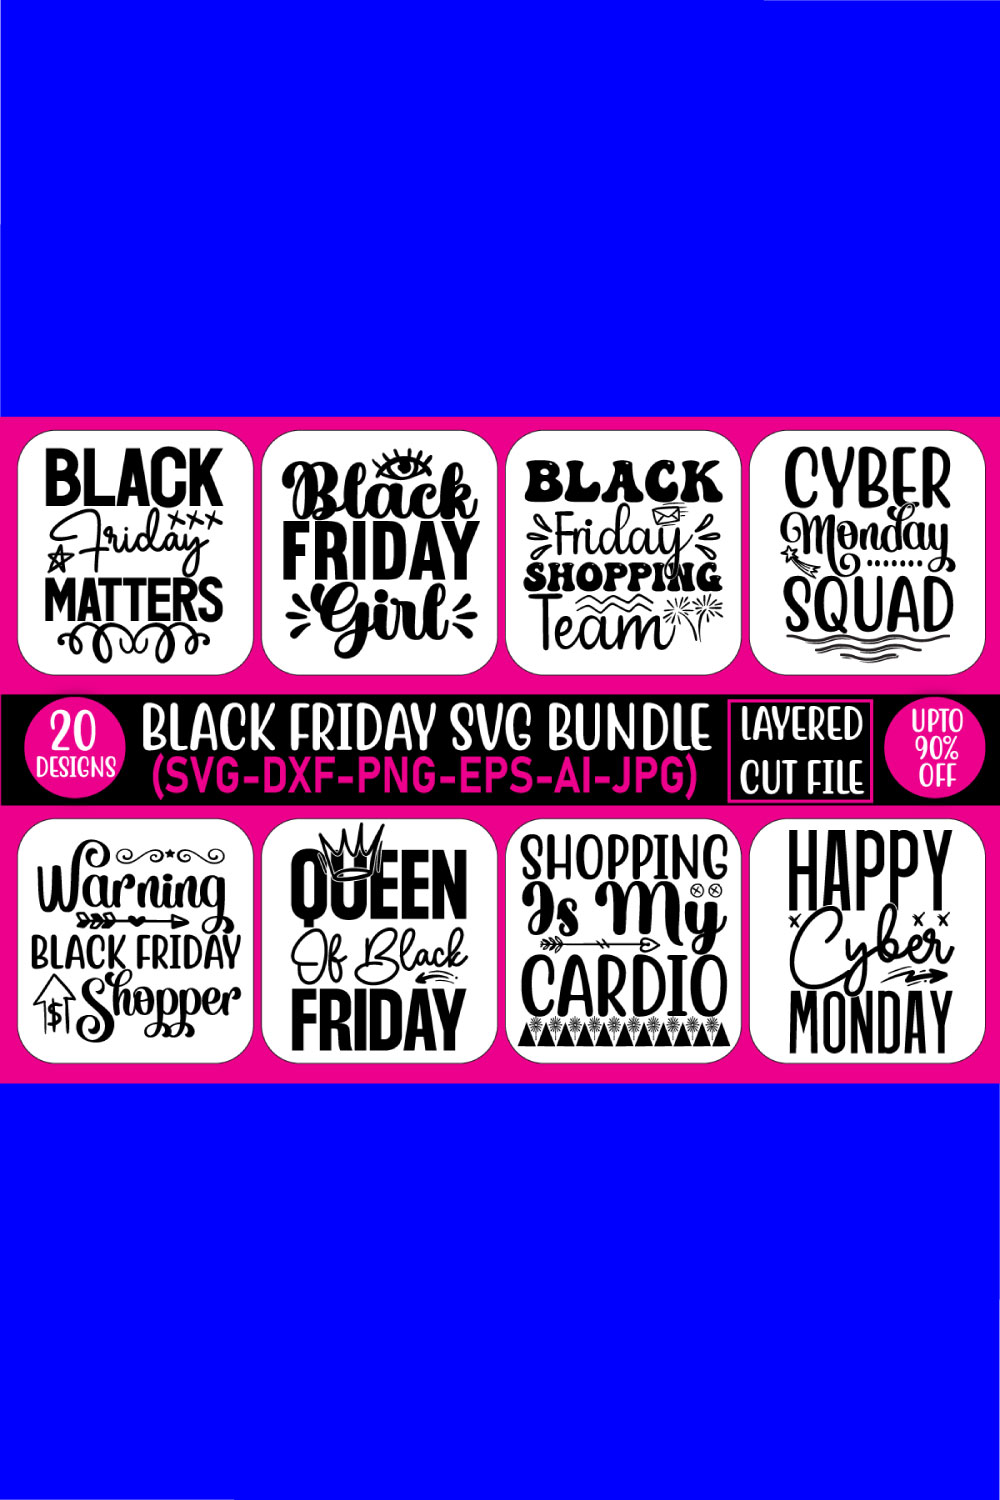 A collection of beautiful images for prints on the theme of the Black Friday promotion.